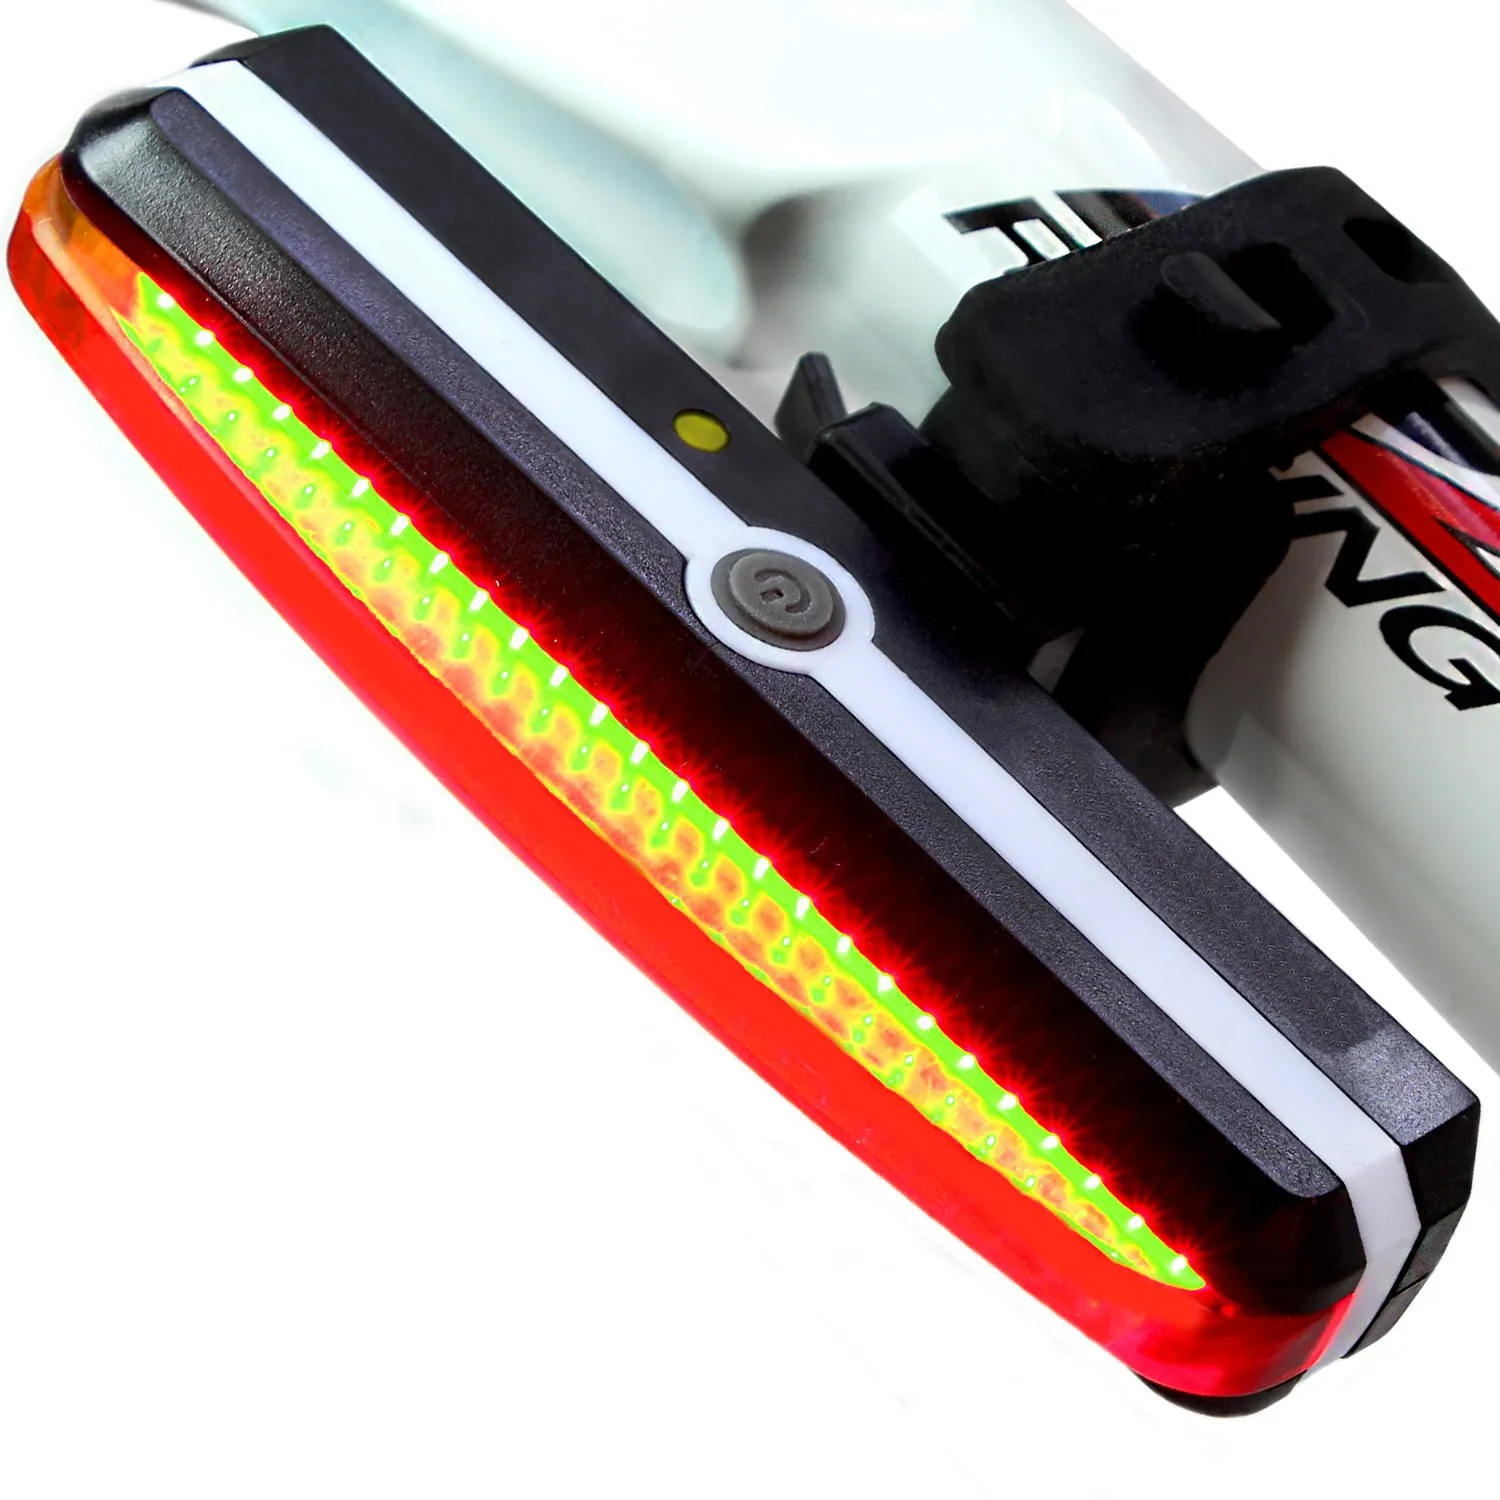 New Ultra Bright Bike Light USB Rechargeable Bicycle Tail Light with High red Intensity Rear LED Accessories